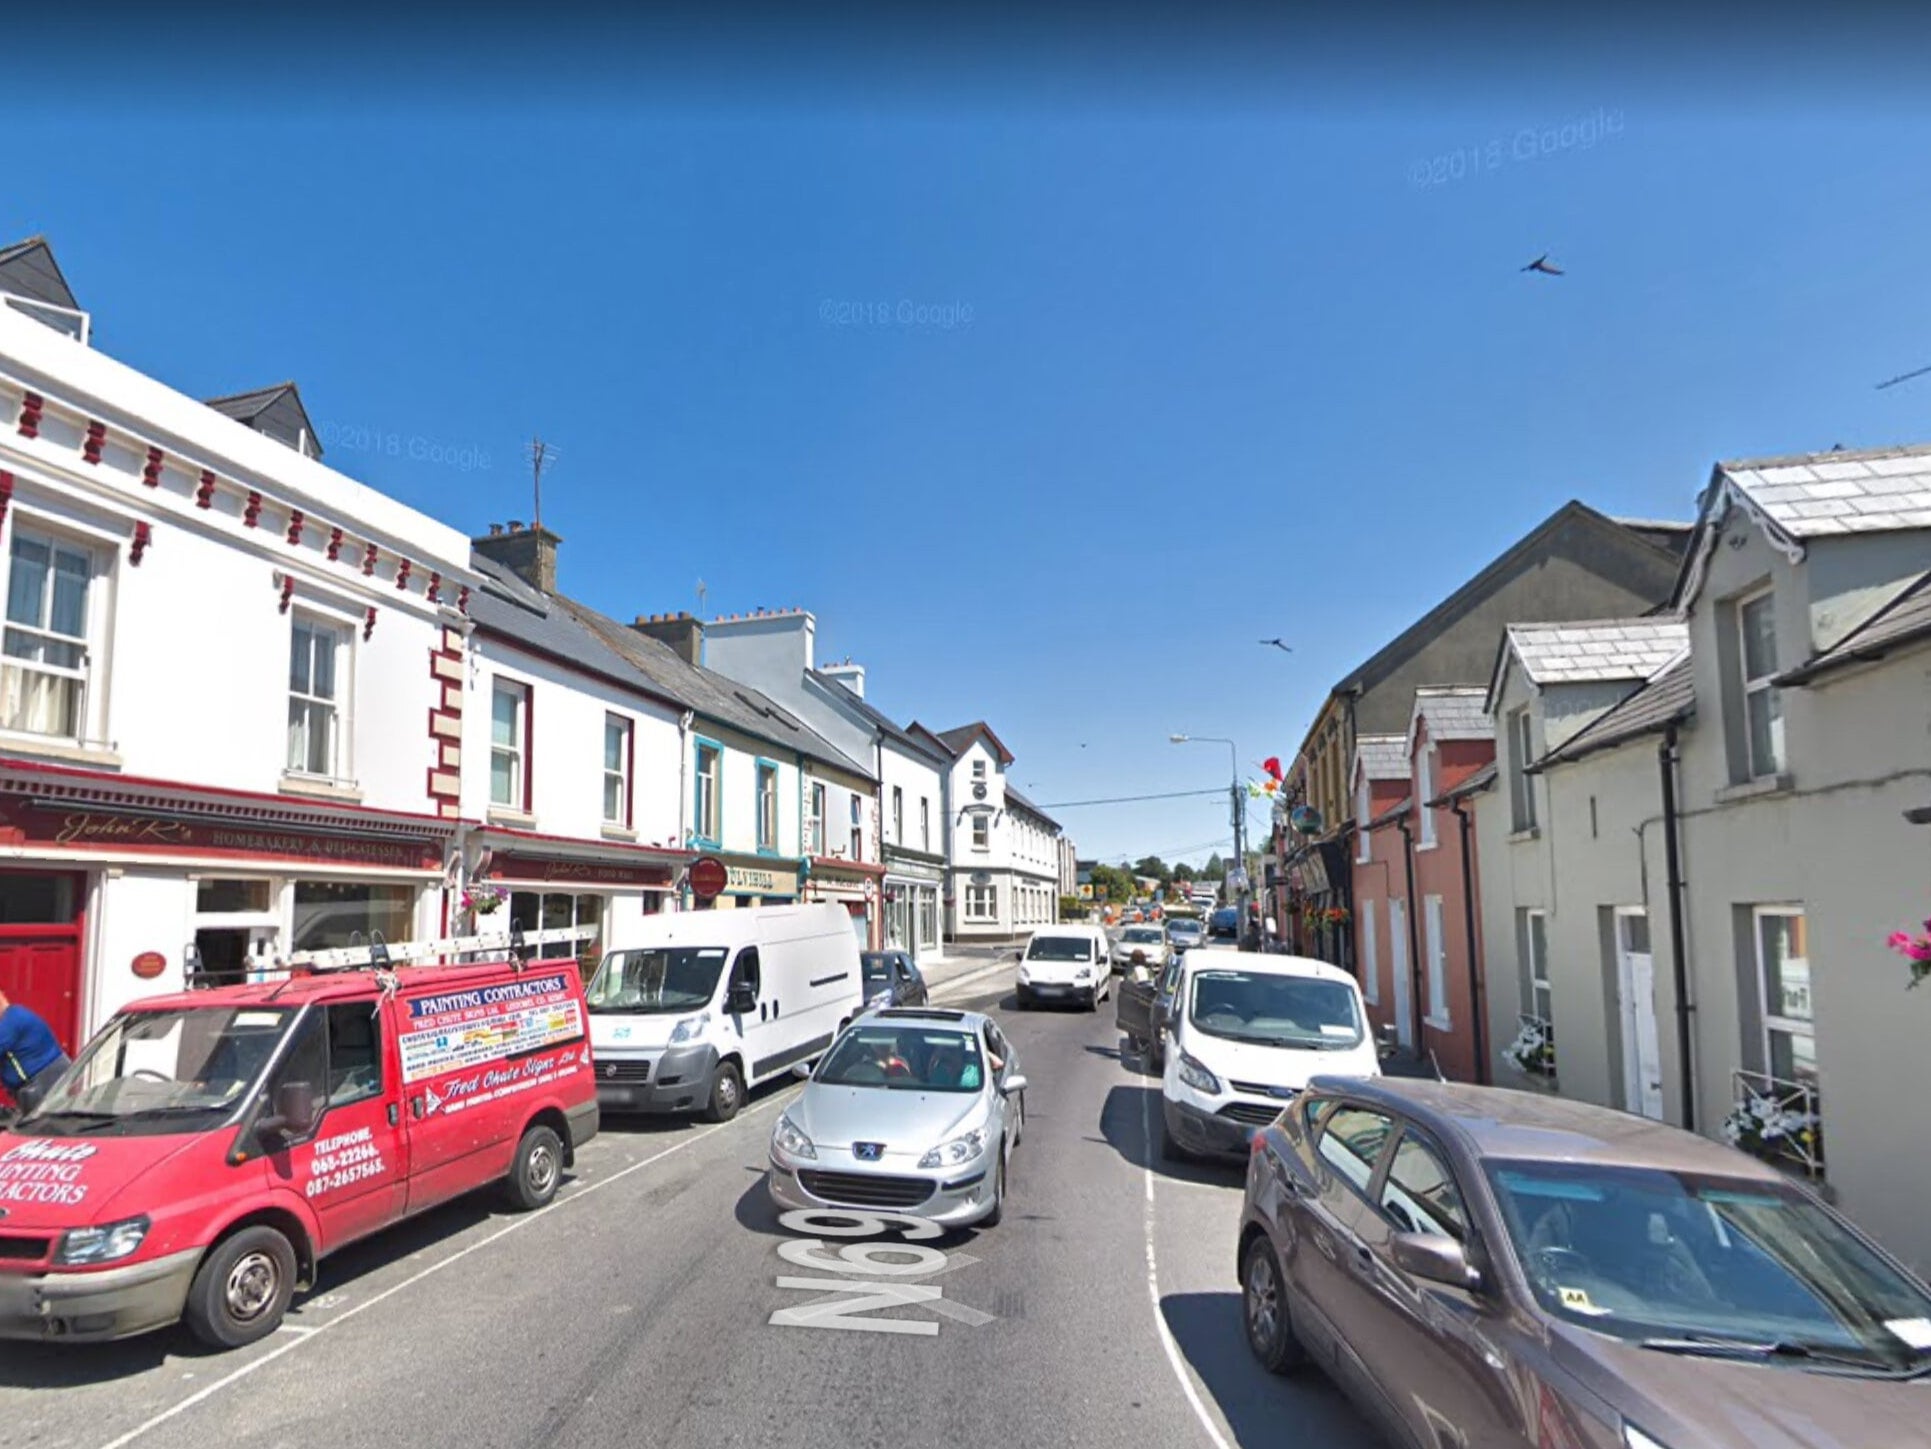 The deceased were found at a property in Listowel, Co Kerry, Ireland.